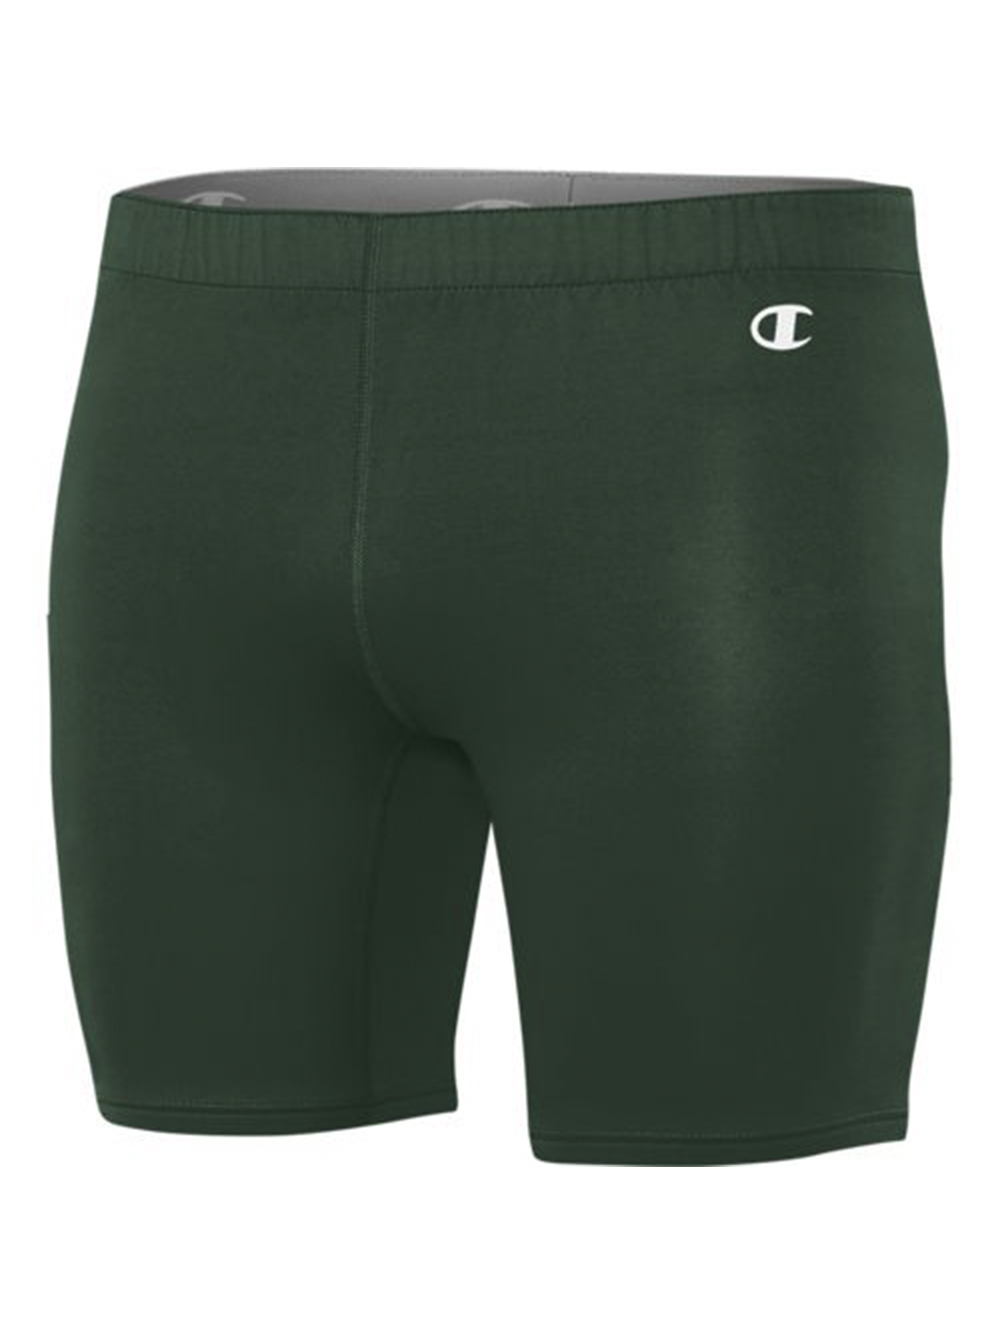 retfærdig sortie Evaluering Champion Compression Short | Midwest Volleyball Warehouse